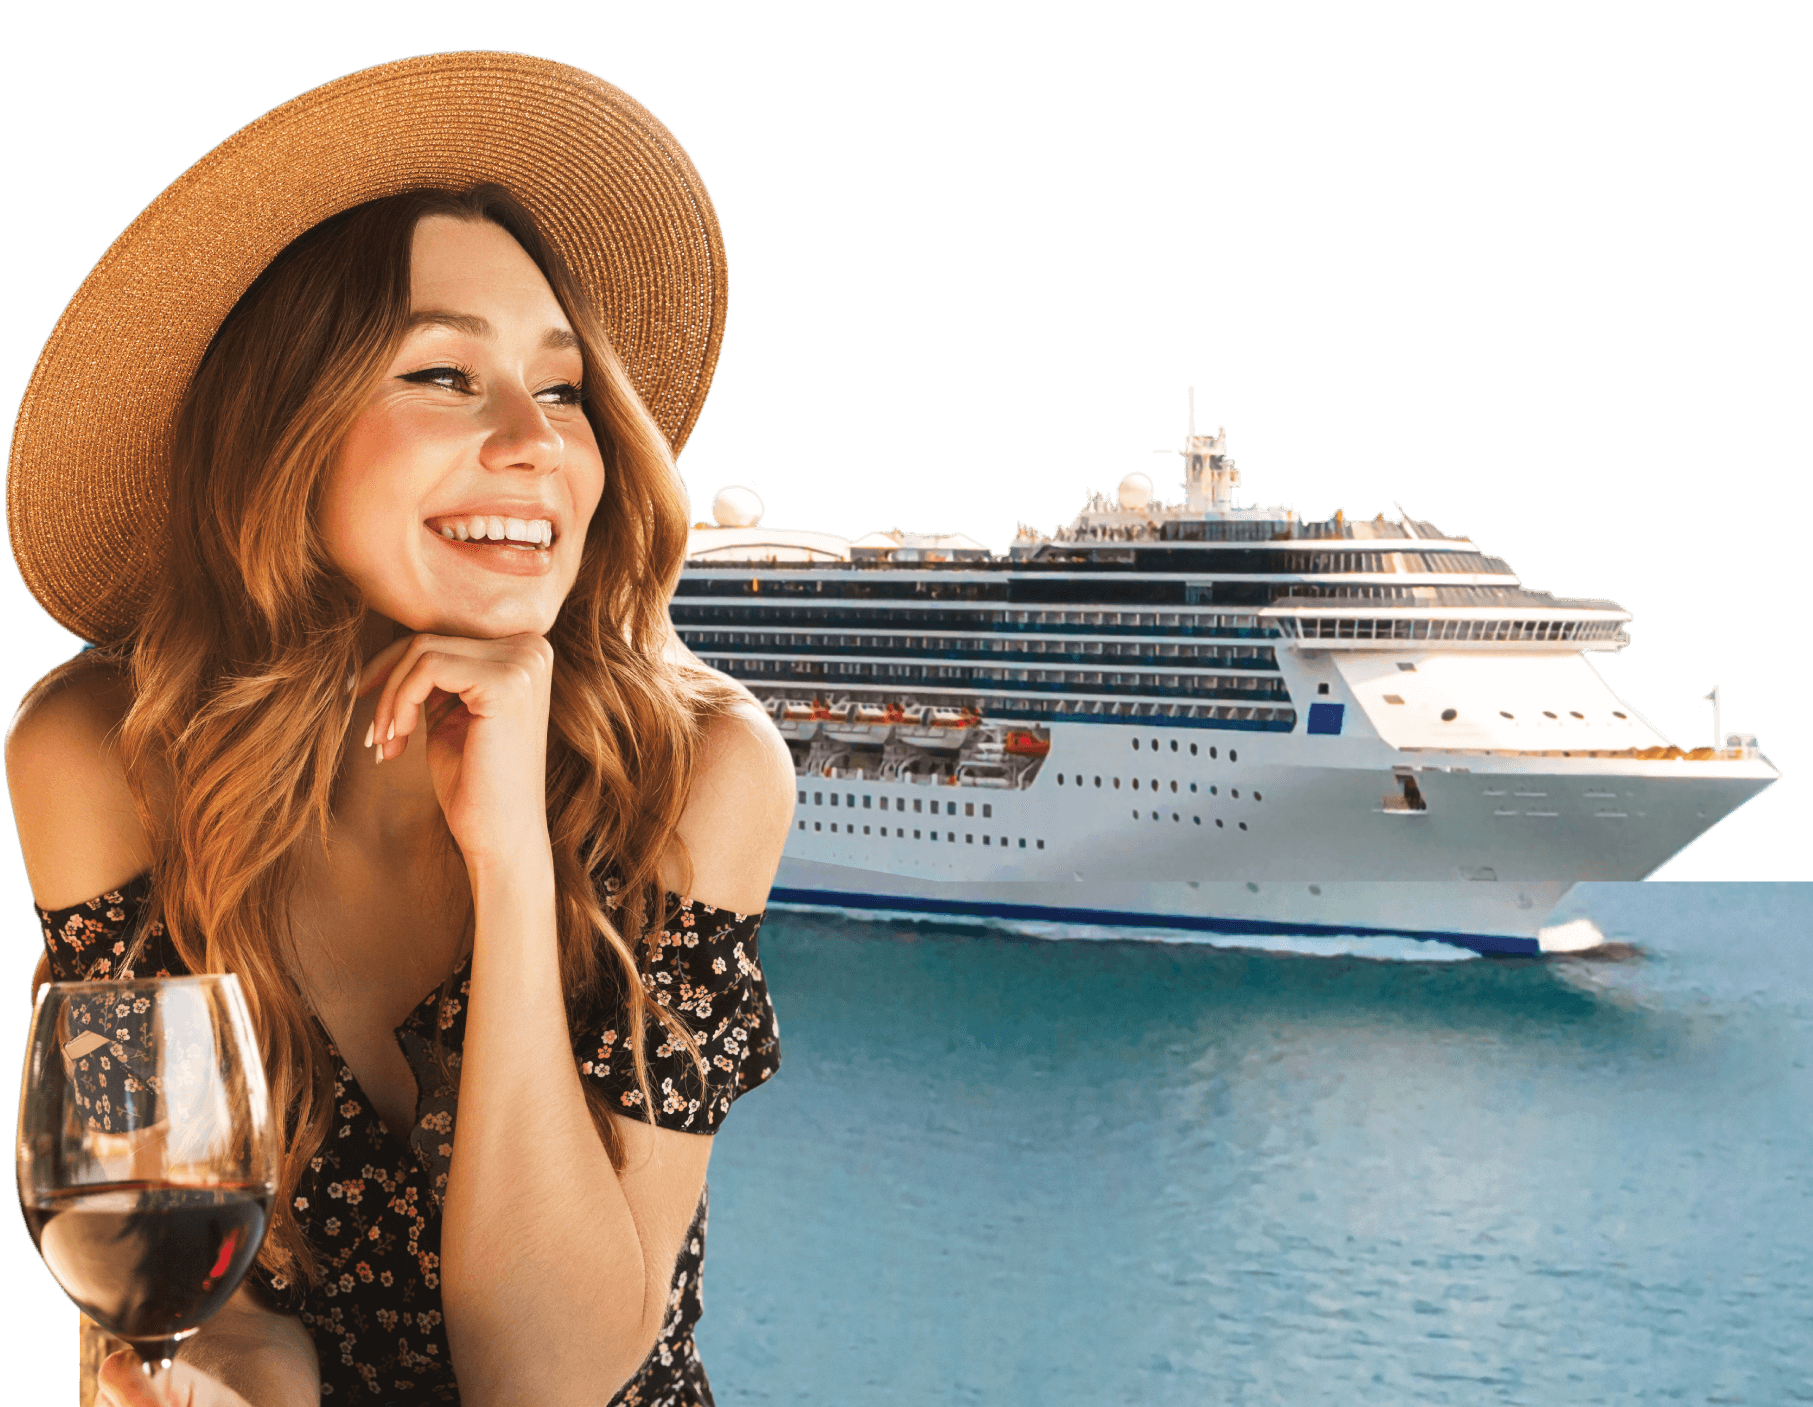 Lady with glass of wine and cruise ship behind her